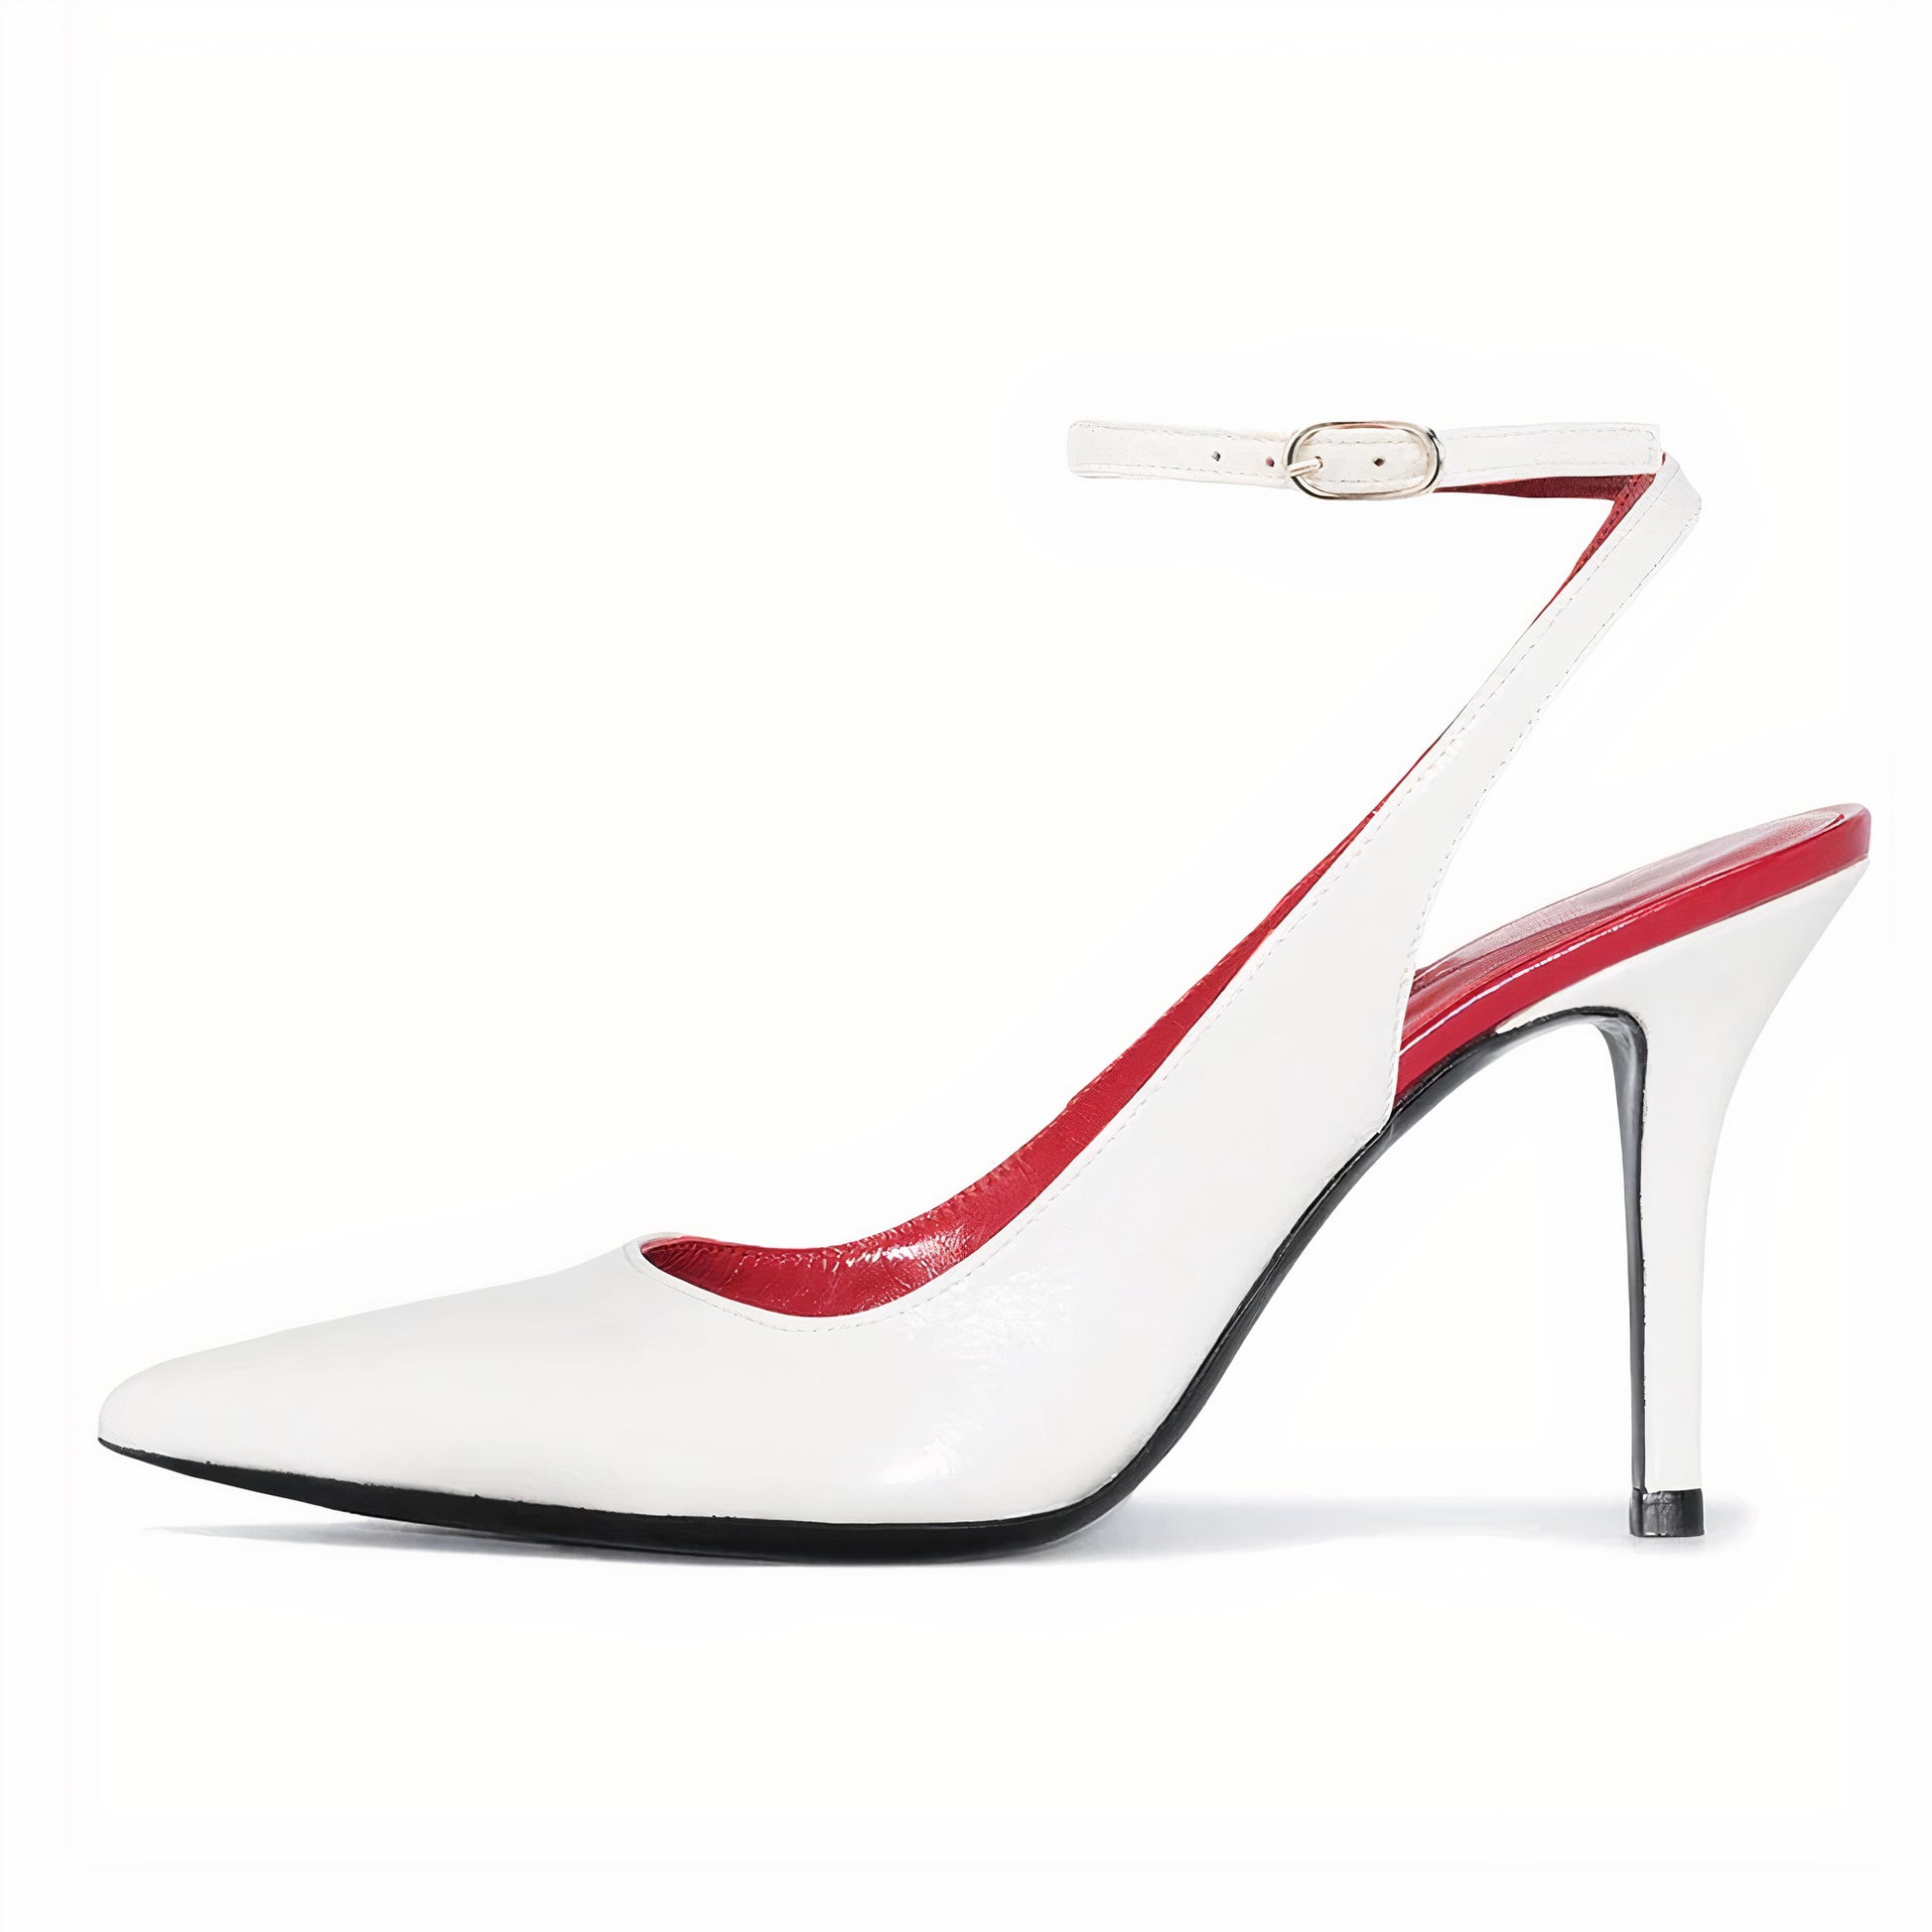 Myra Pump is classy for all white office look and in plus sizes